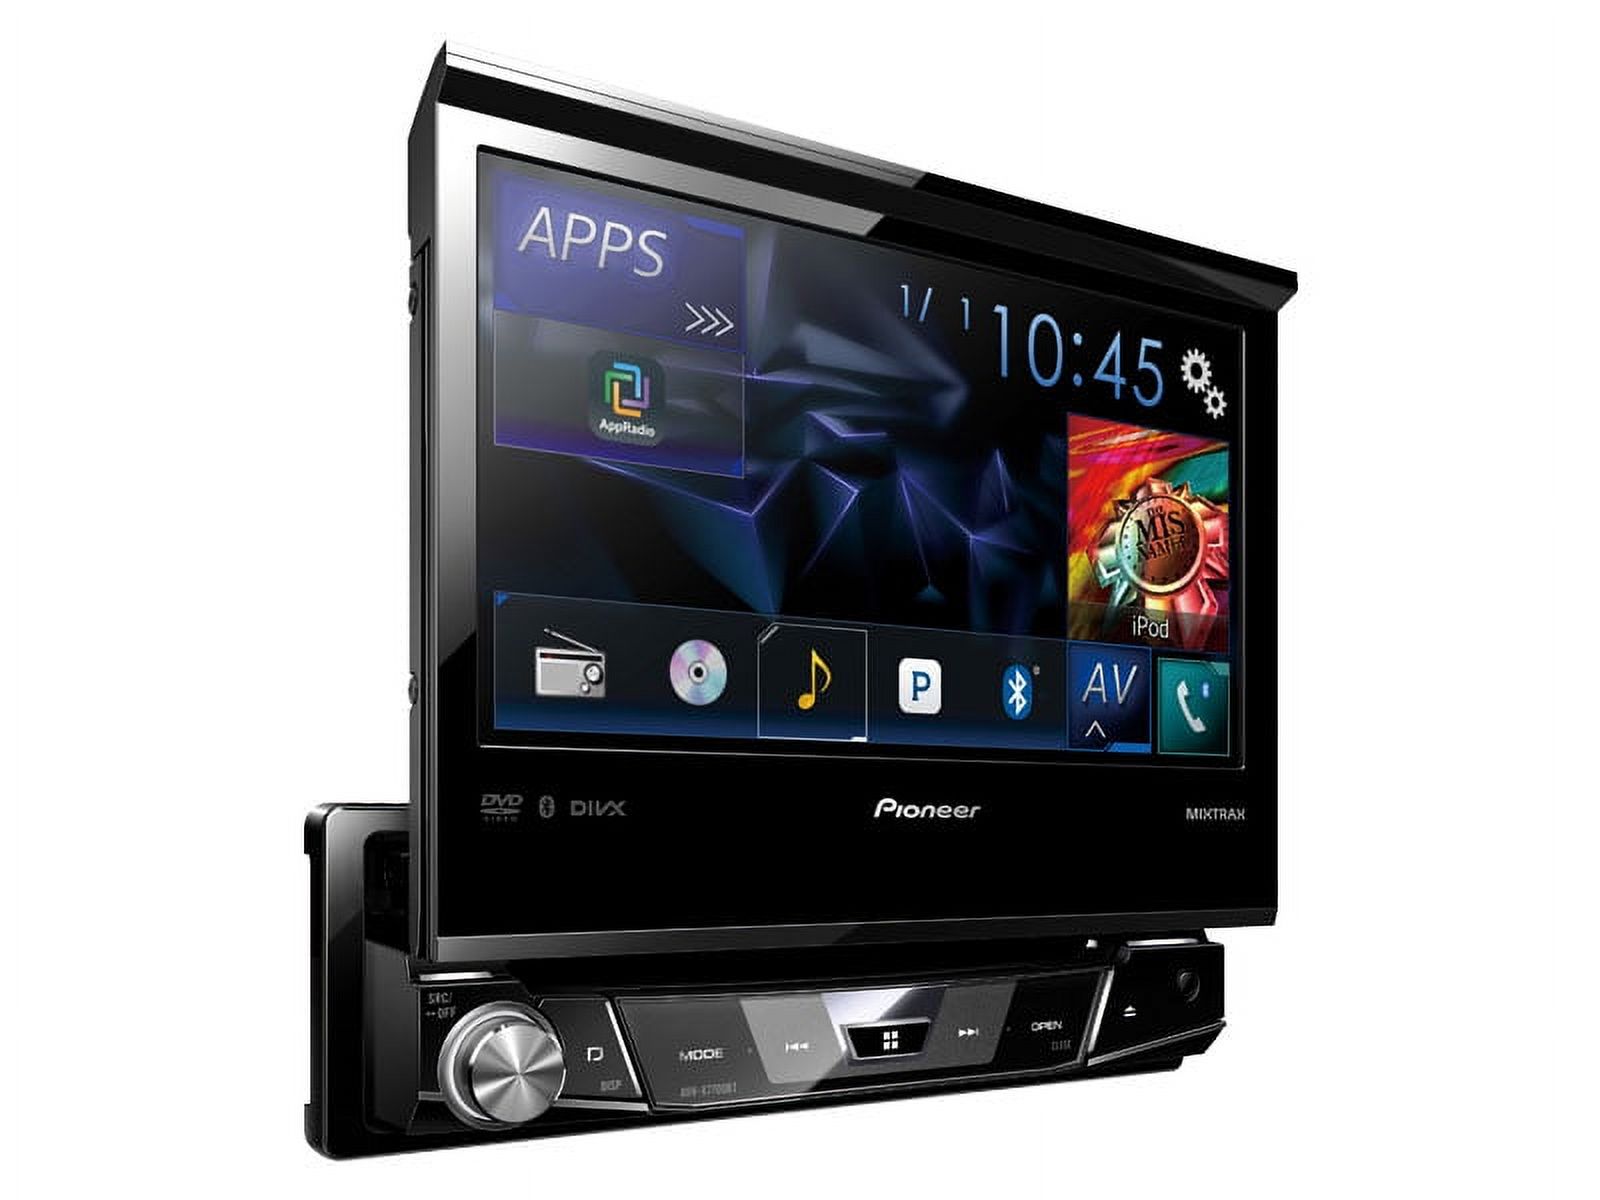 Pioneer AVH-X7700BT - DVD receiver - display - 7" - touch screen - in-dash unit - Single-DIN - 50 Watts x 4 - image 2 of 3